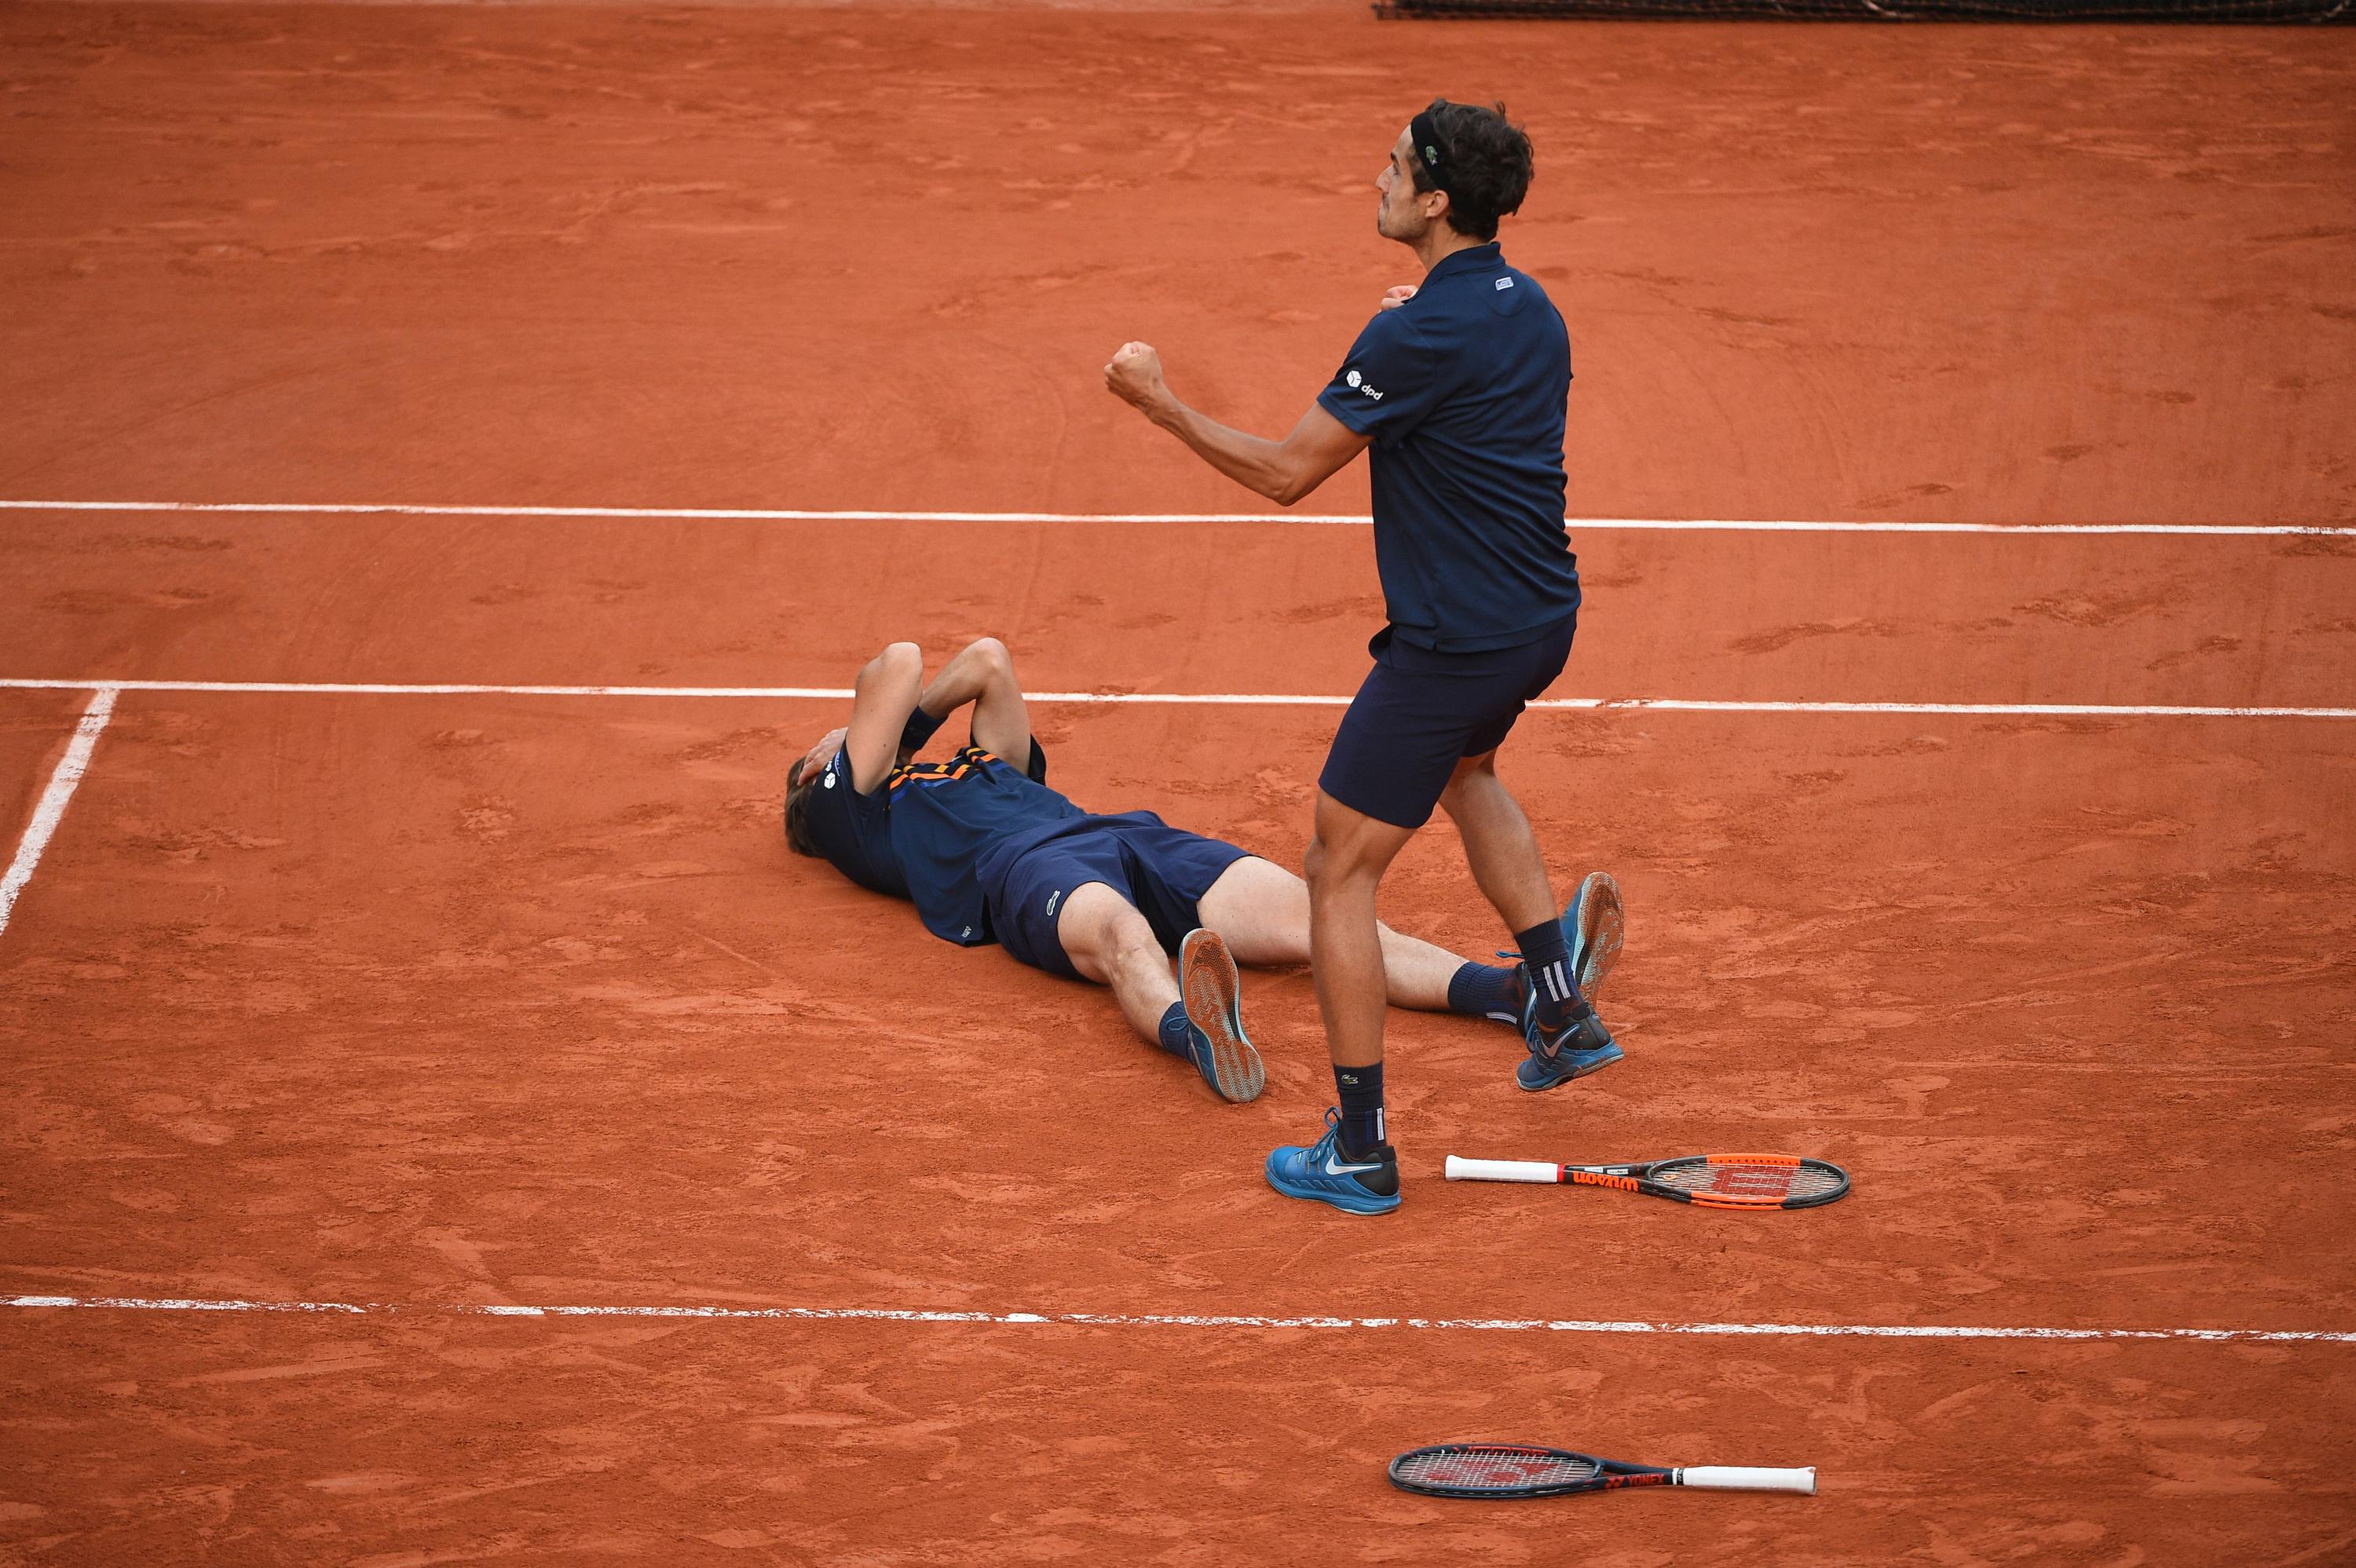 Nicolas Mahut and Pierre-Hugues Herbert happy with the win at Roland-Garros 2018